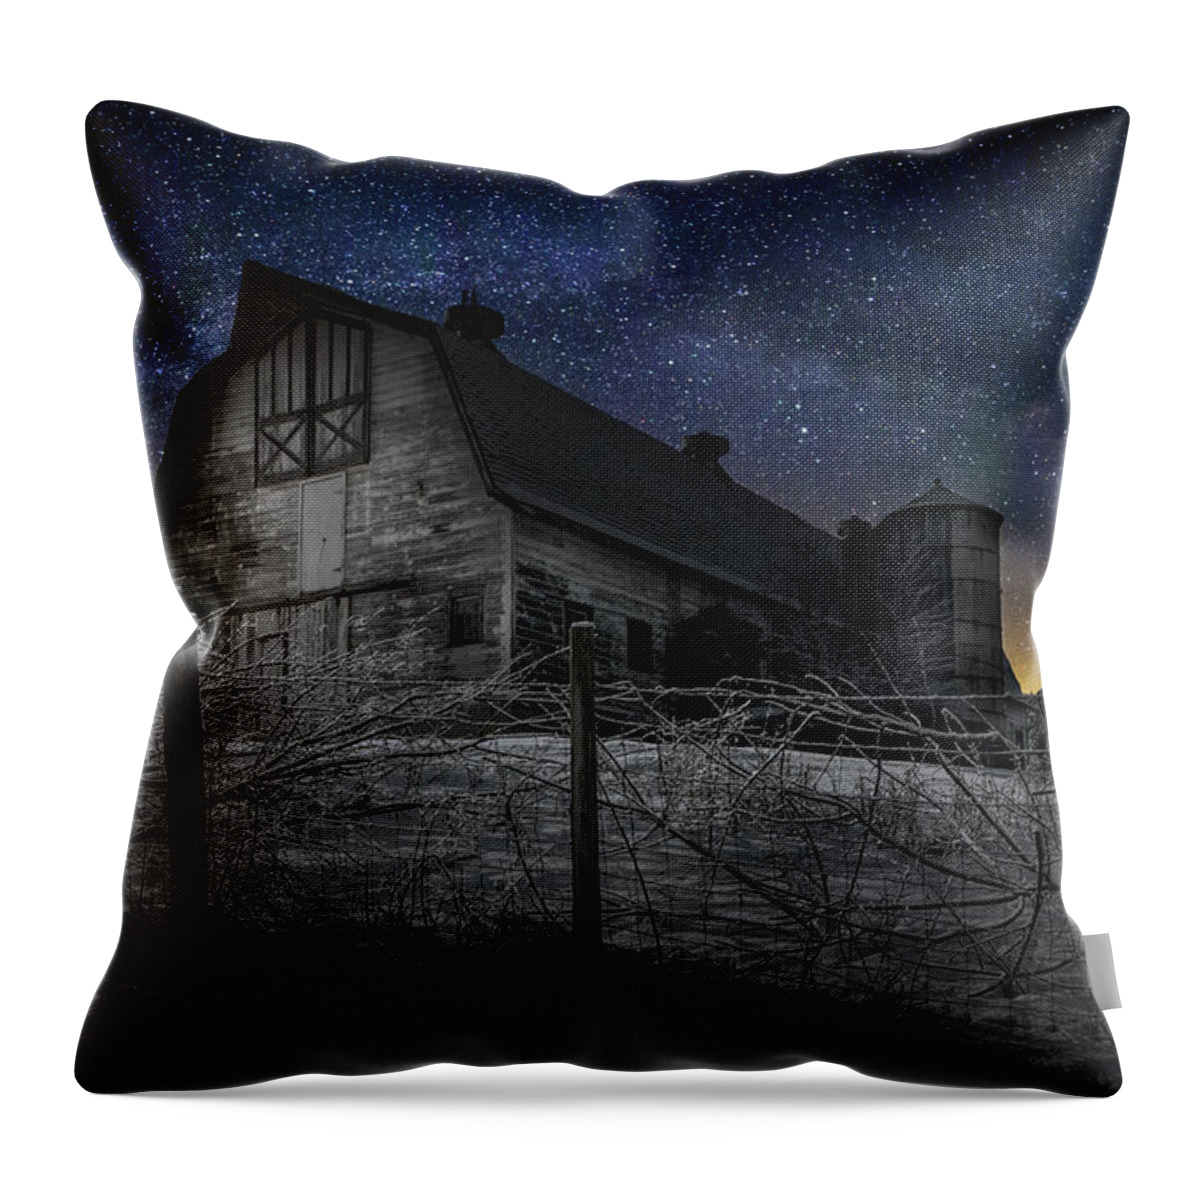 Milky Way Throw Pillow featuring the photograph Interstellar Farm by Bill Wakeley